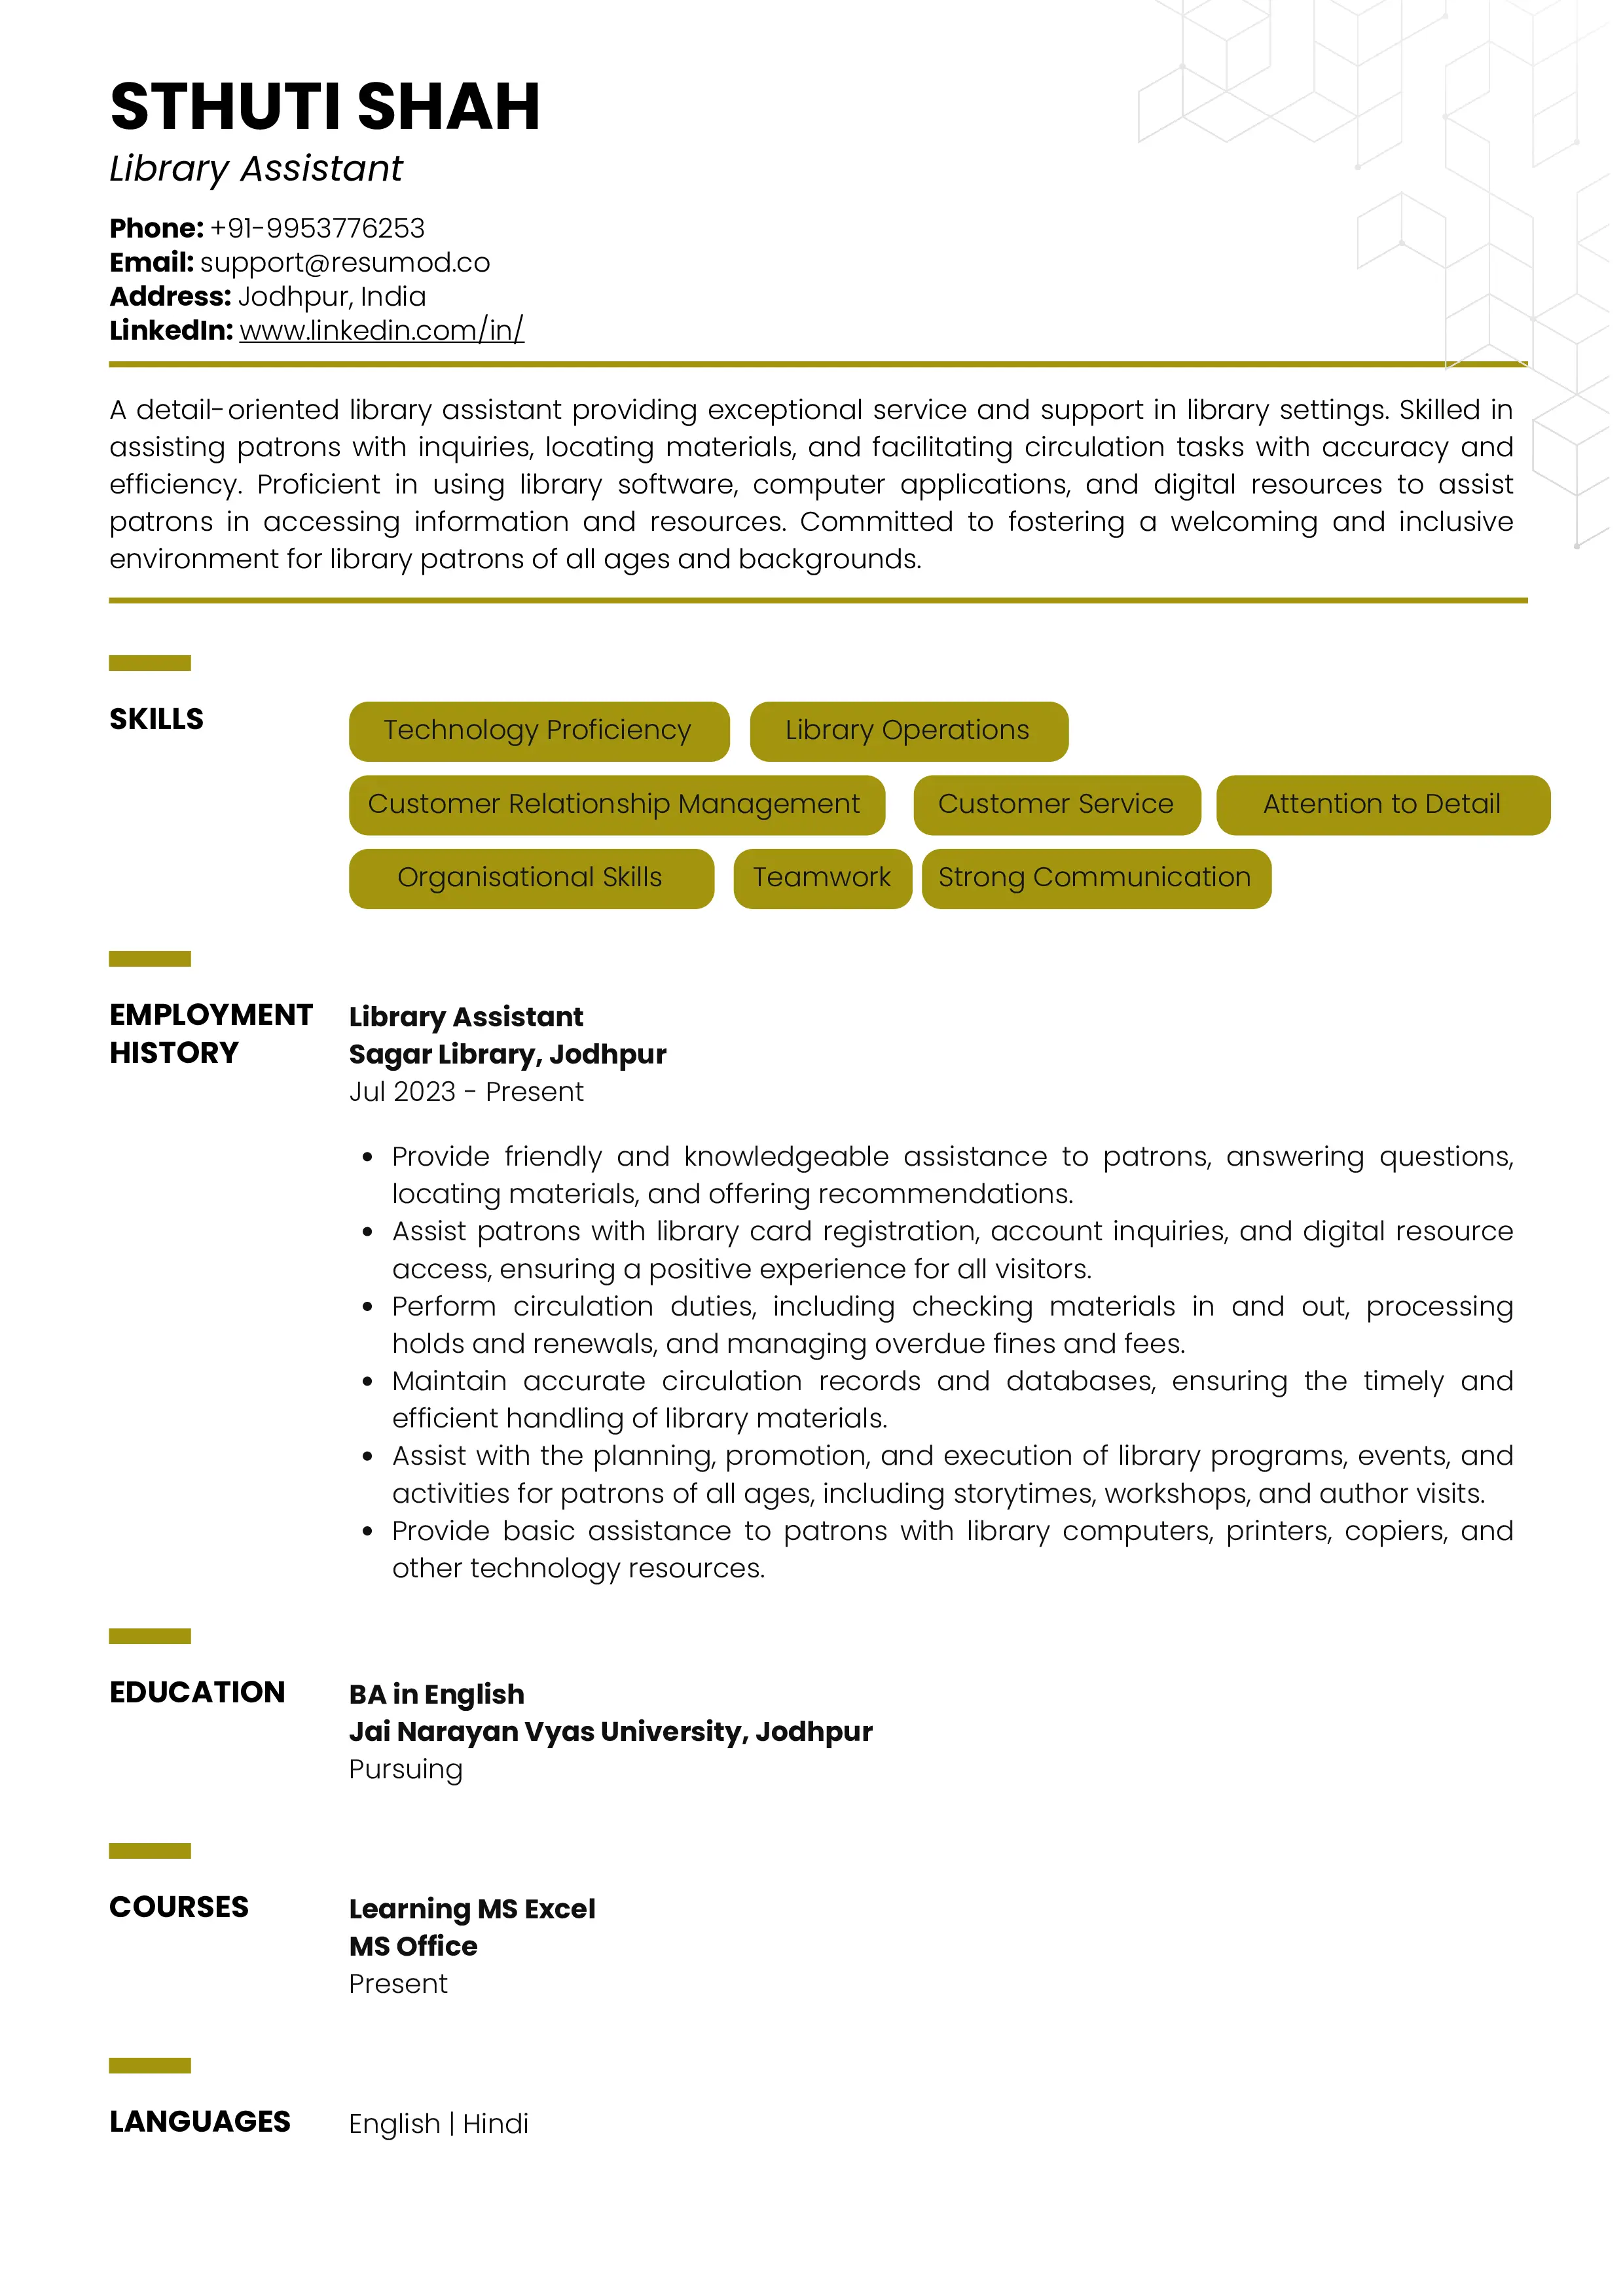 Sample Resume of Library Assistant | Free Resume Templates & Samples on Resumod.co